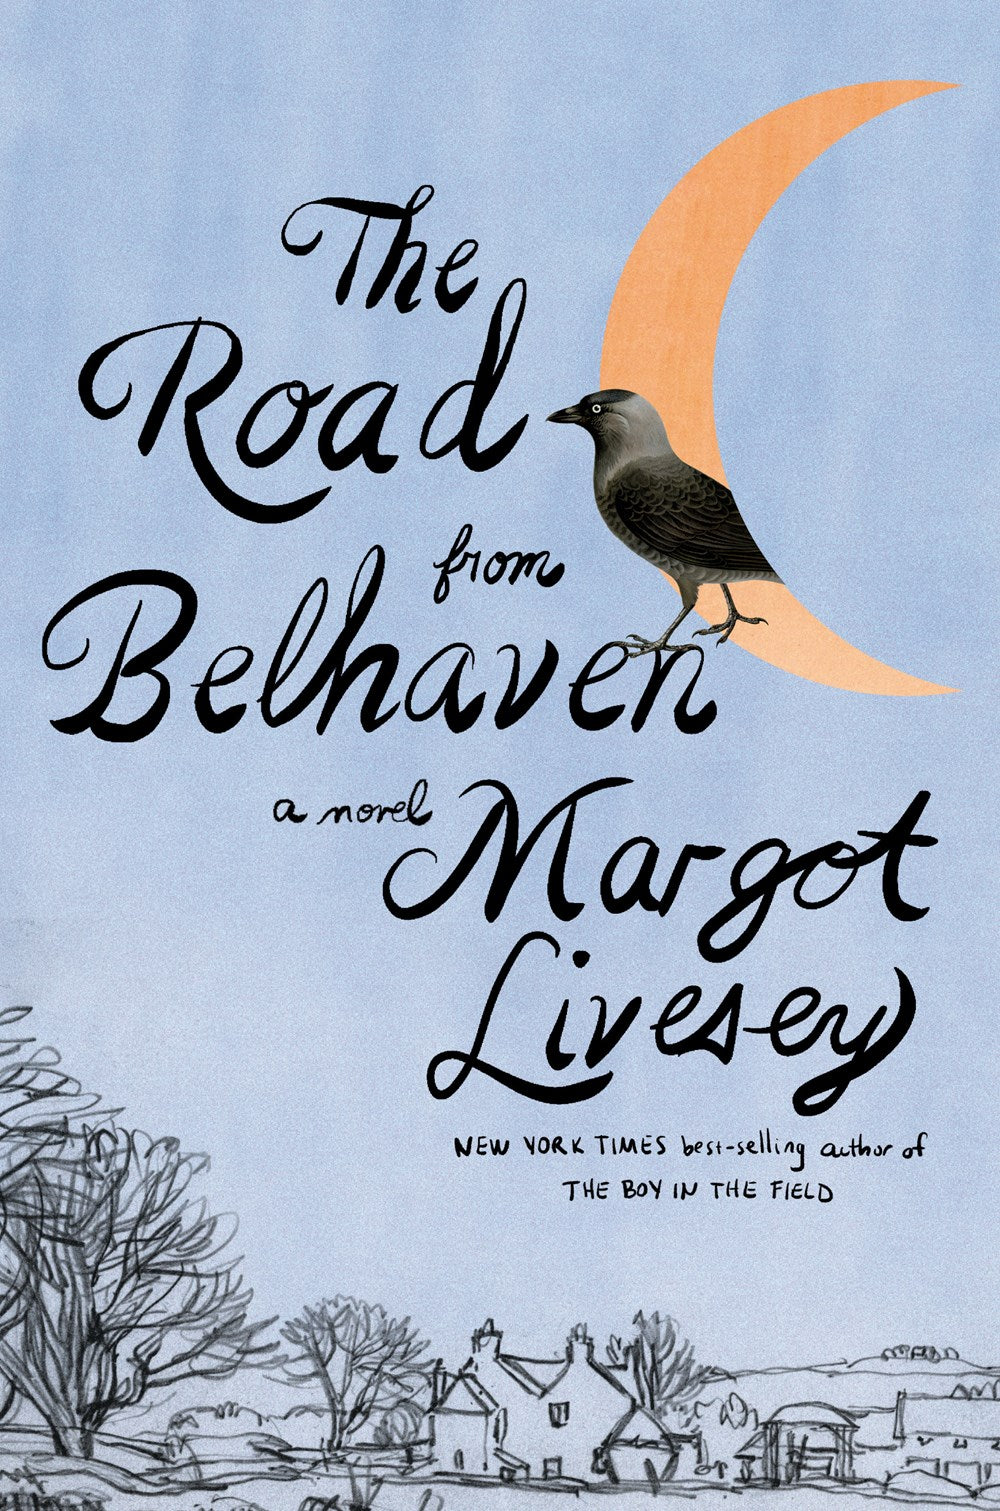 The Road from Belhaven: A Novel by Margot Livesey (2/6/24)